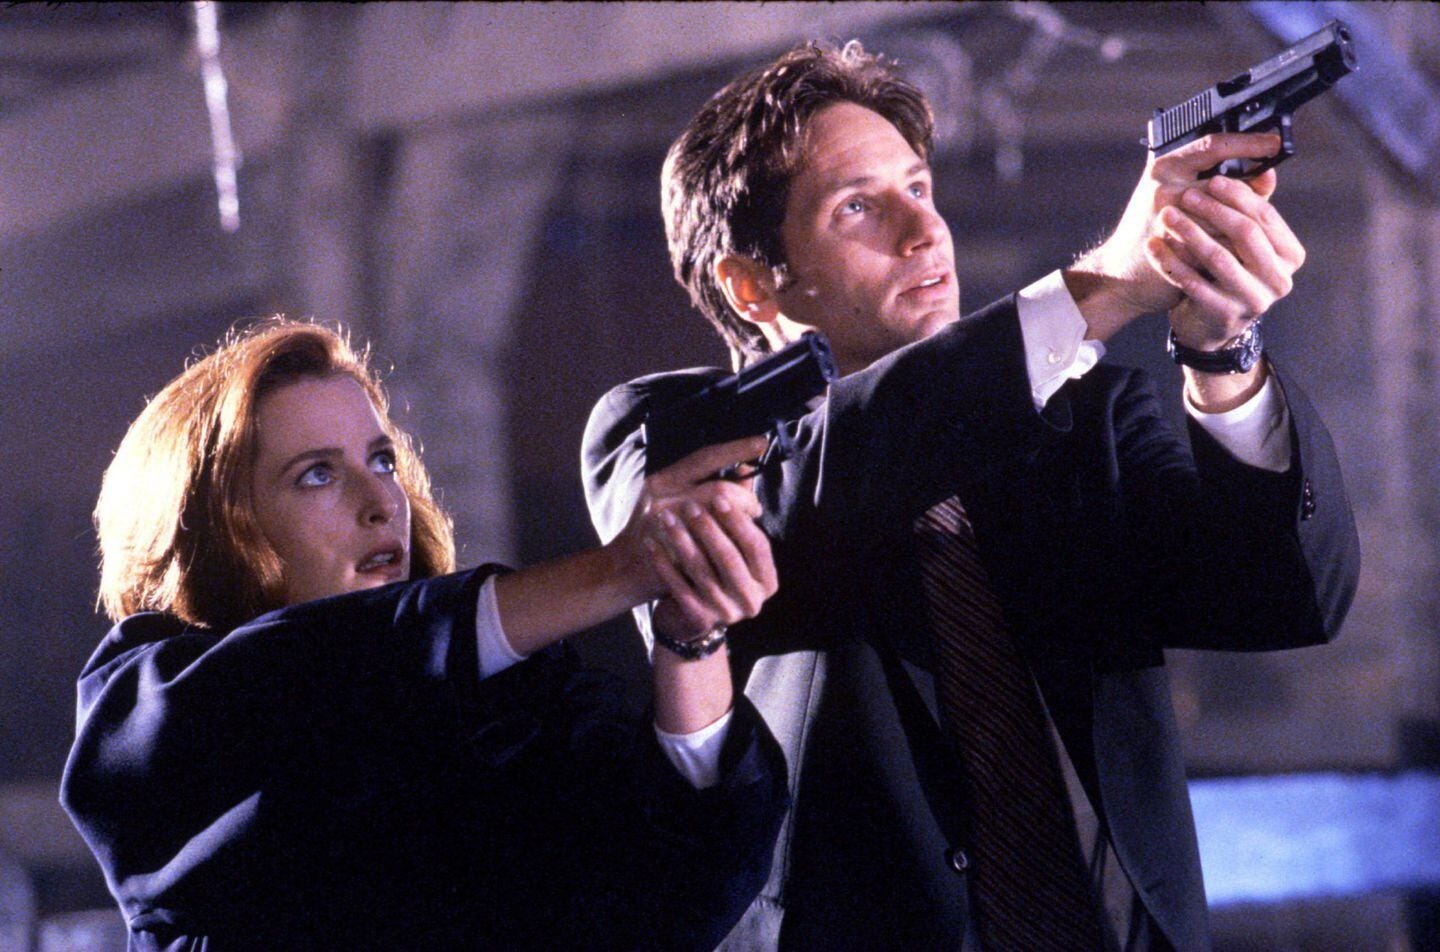 A man and woman hold guns with two hands, one hand around the grip and the other supporting it from below